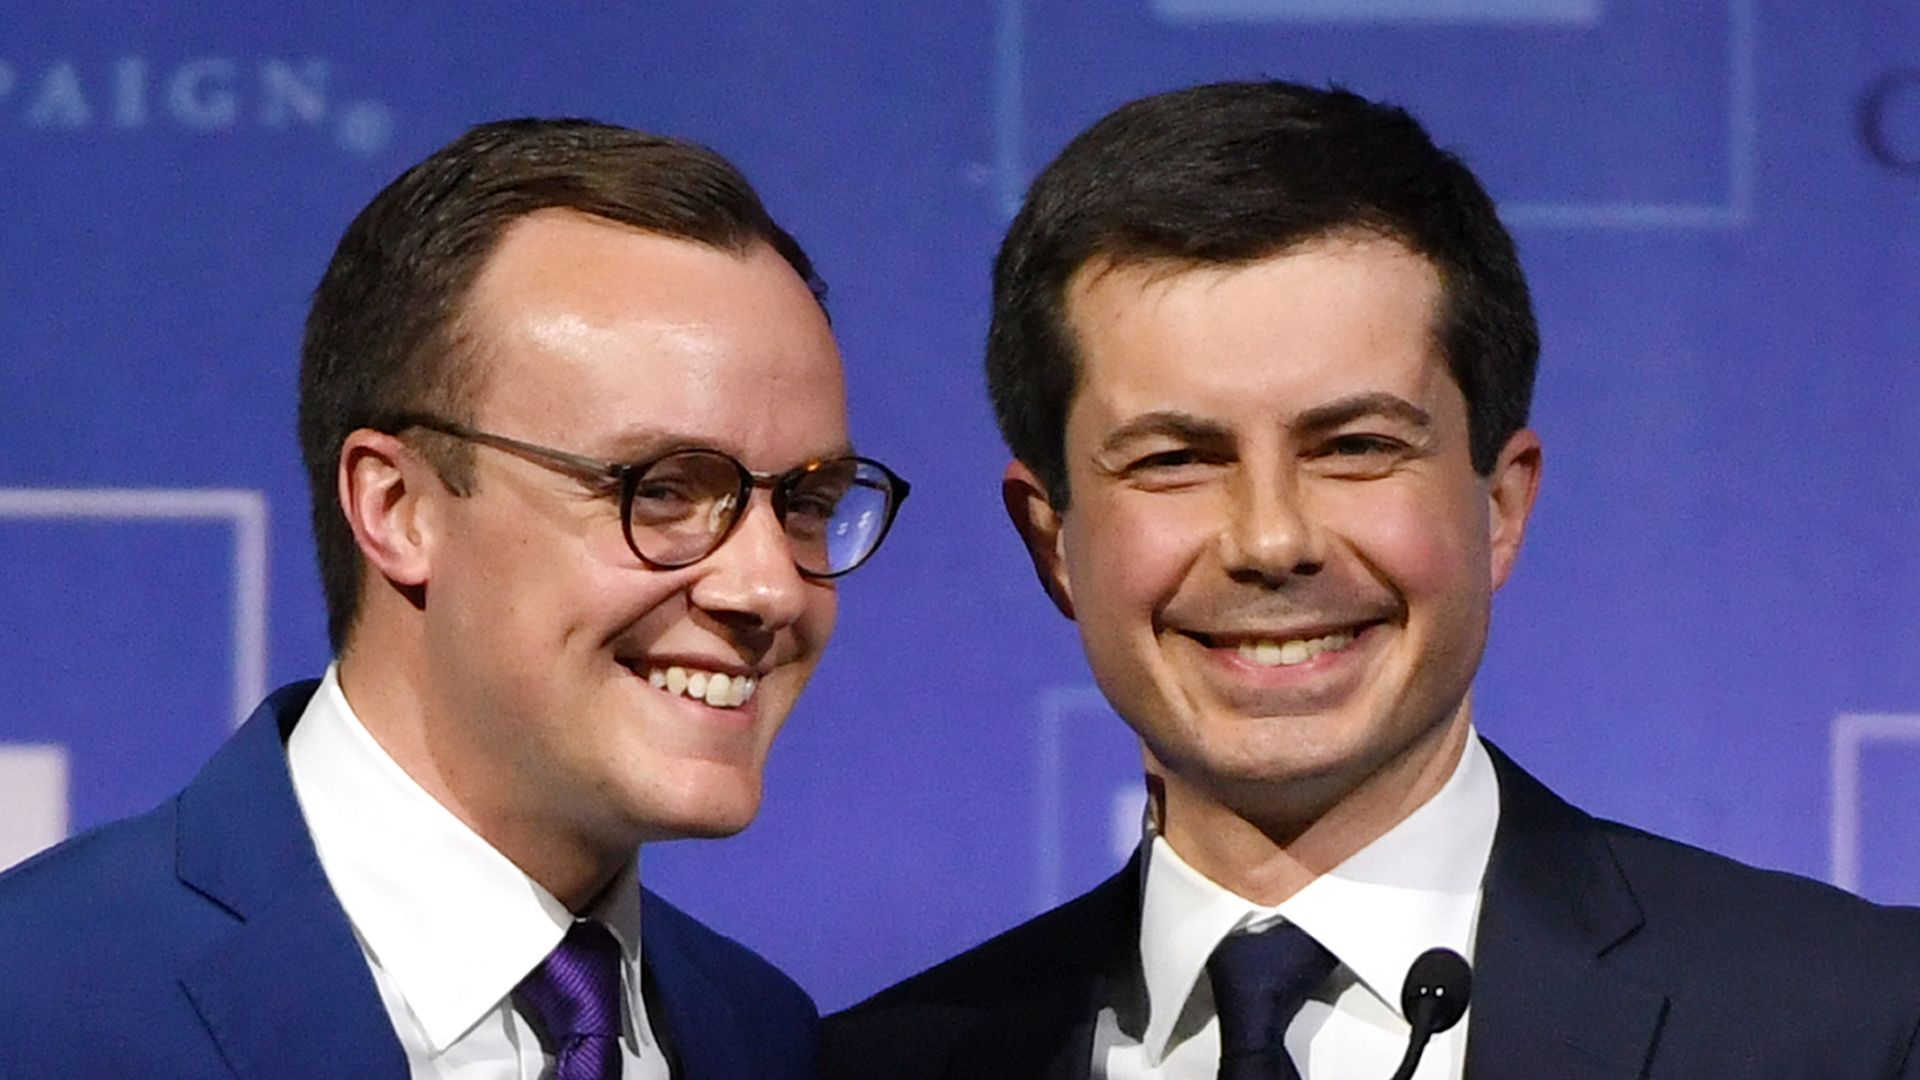 Pete Buttigieg and his husband have $130,000 in college debt - Axios1920 x 1080